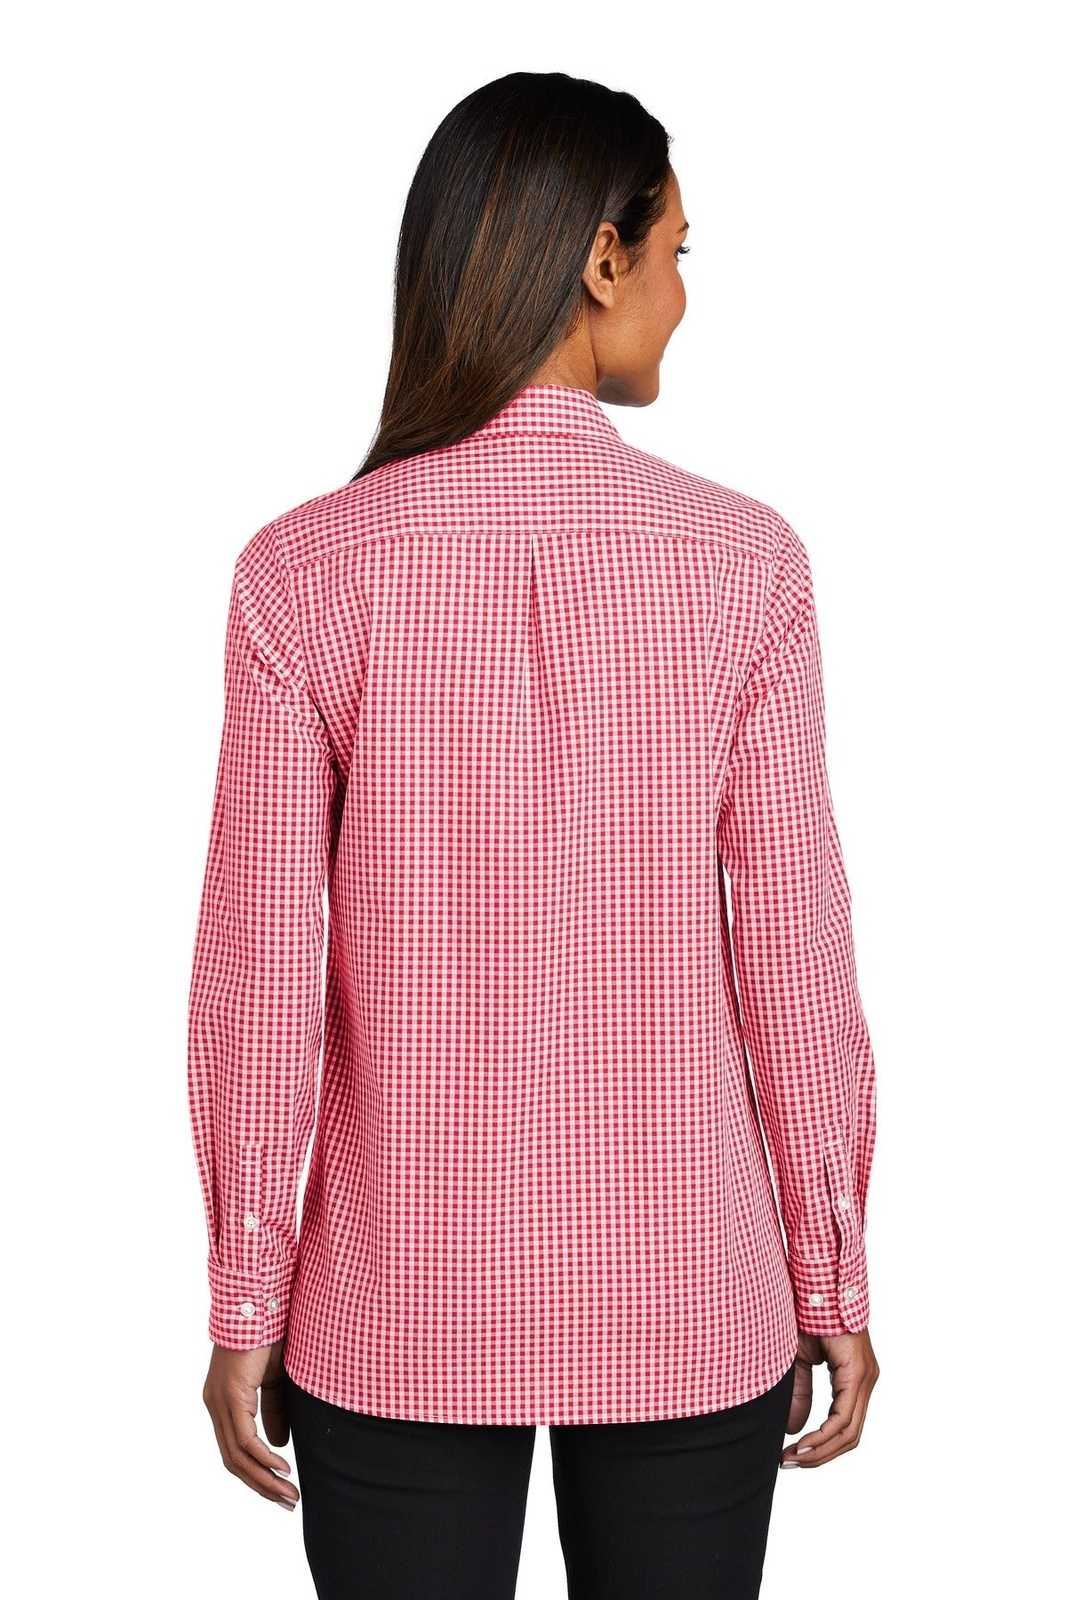 Port Authority LW644 Ladies Broadcloth Gingham Easy Care Shirt - Rich Red White - HIT a Double - 1